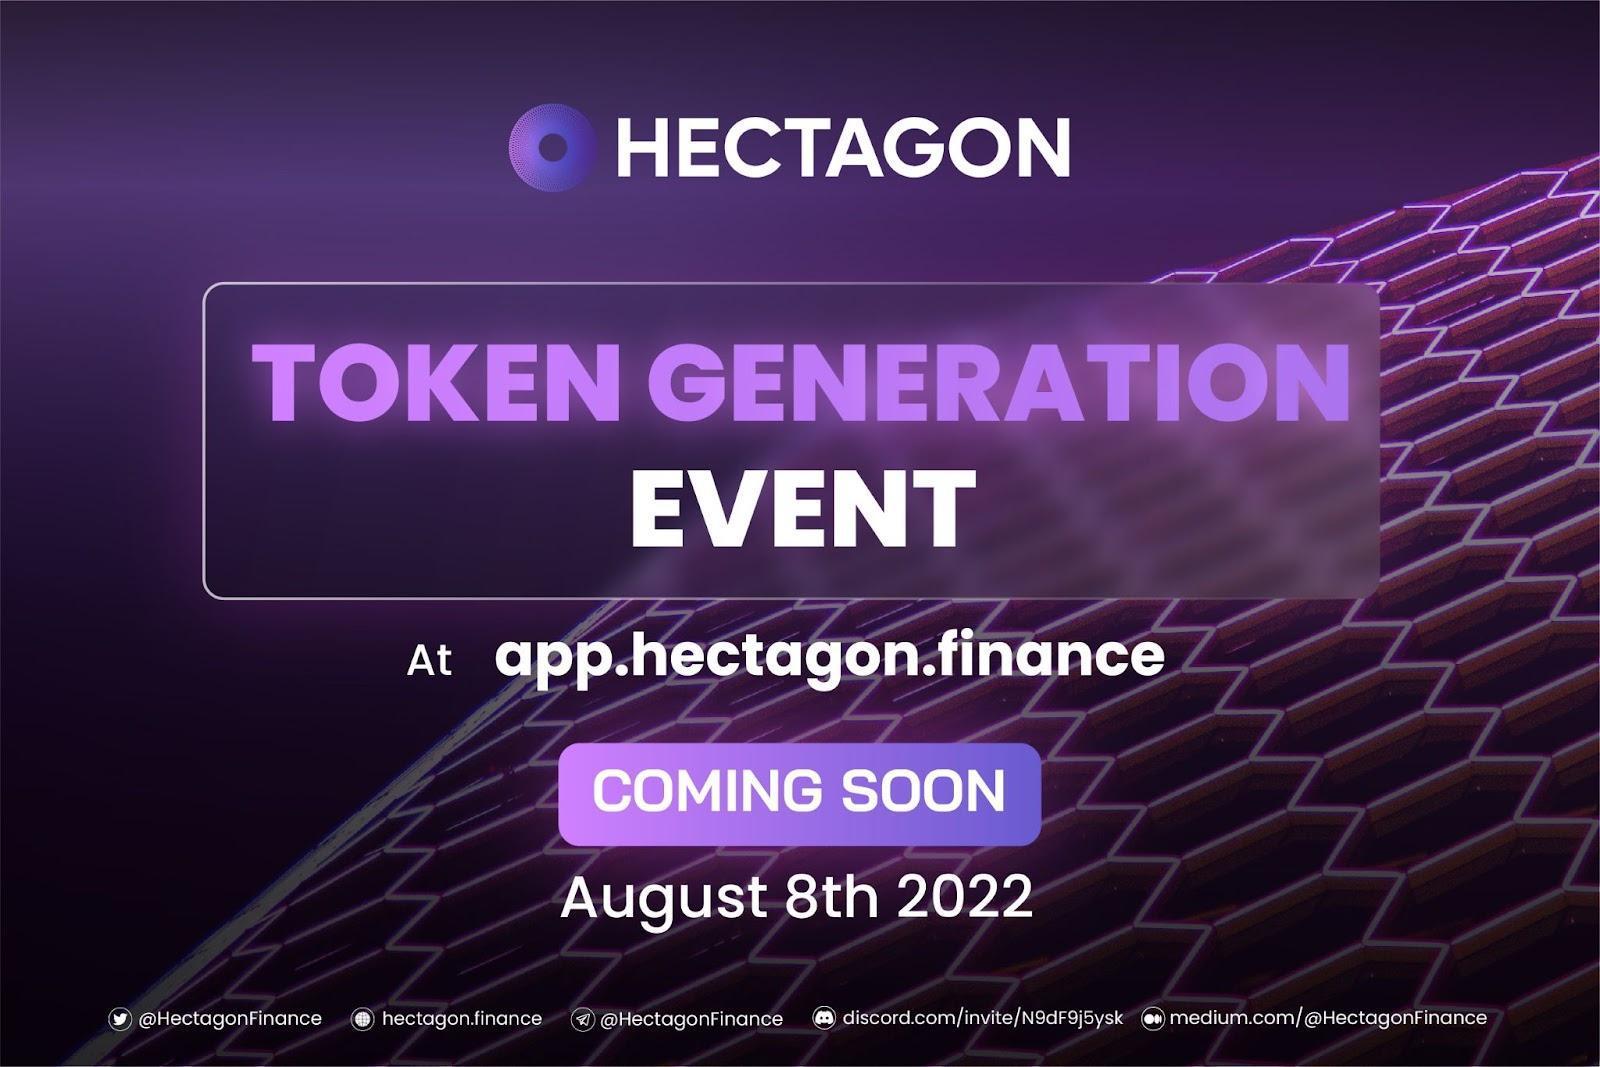 Hectagon to Launch TGE on August 8 Aiming to Bootstrap Decentralized VC DAO